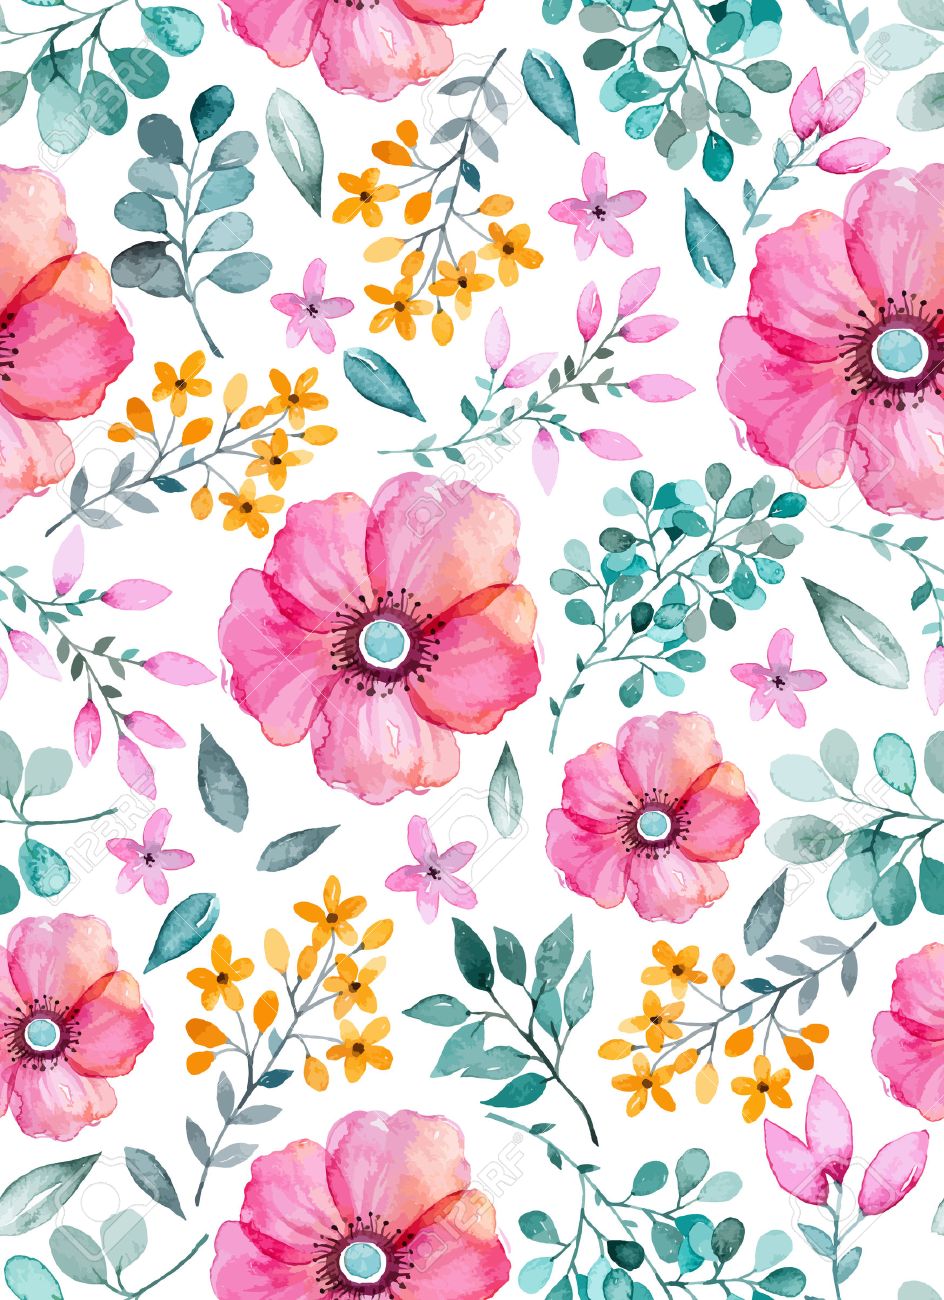 Watercolor Floral Seamless Pattern With Flowers And Leafs